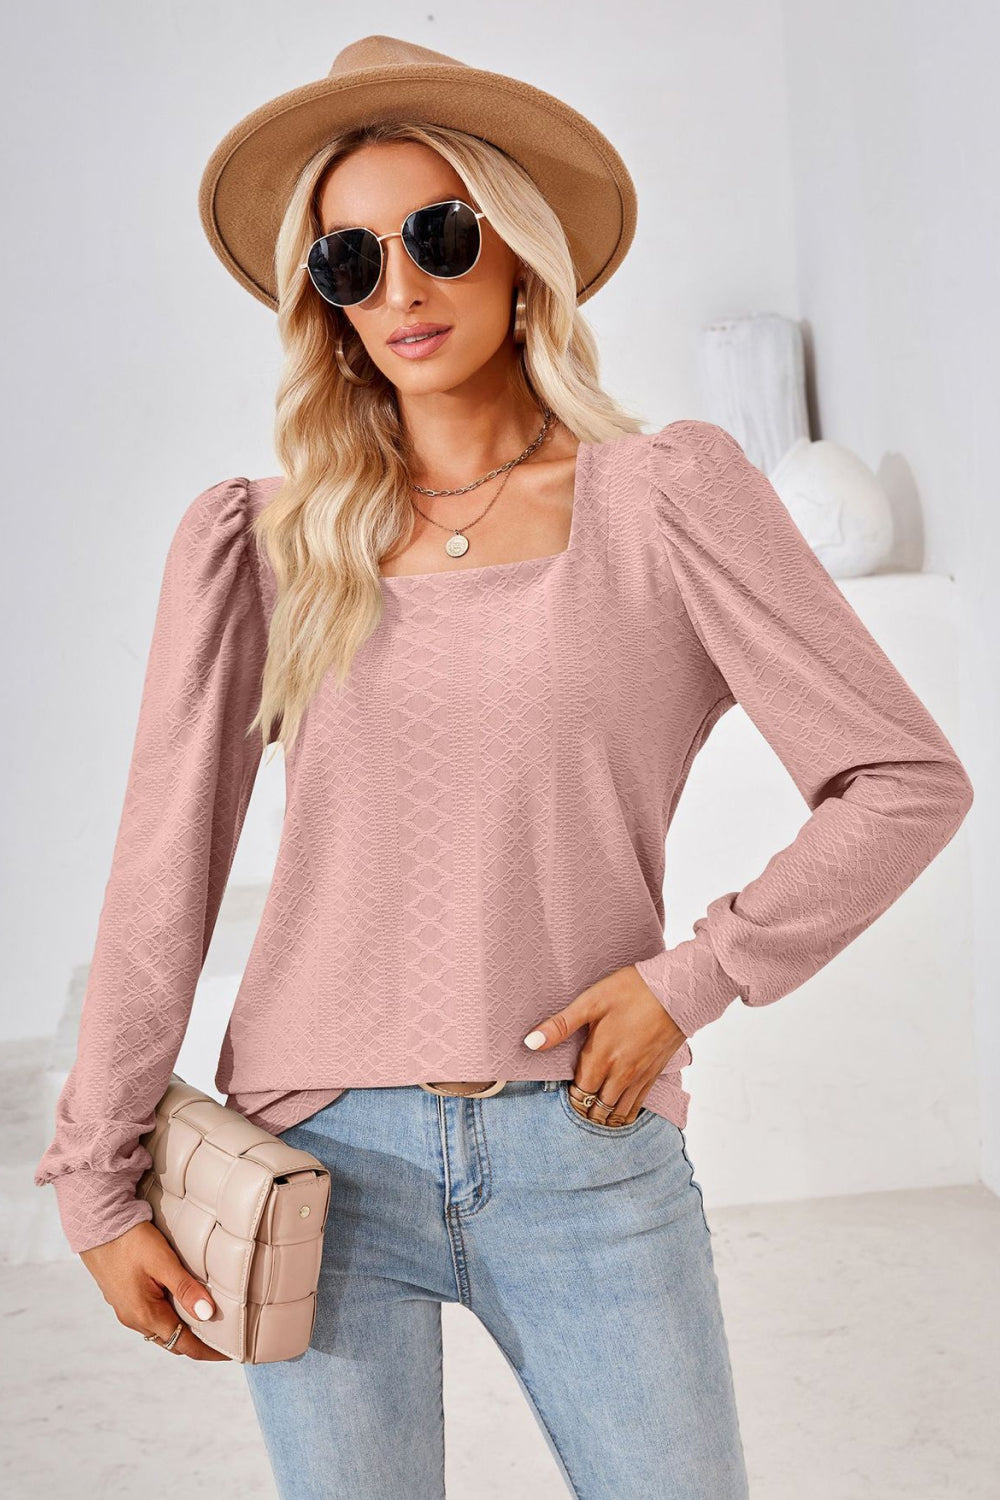 Square Neck Puff Sleeve Blouse (8 Colors)  Krazy Heart Designs Boutique Dusty Pink S 